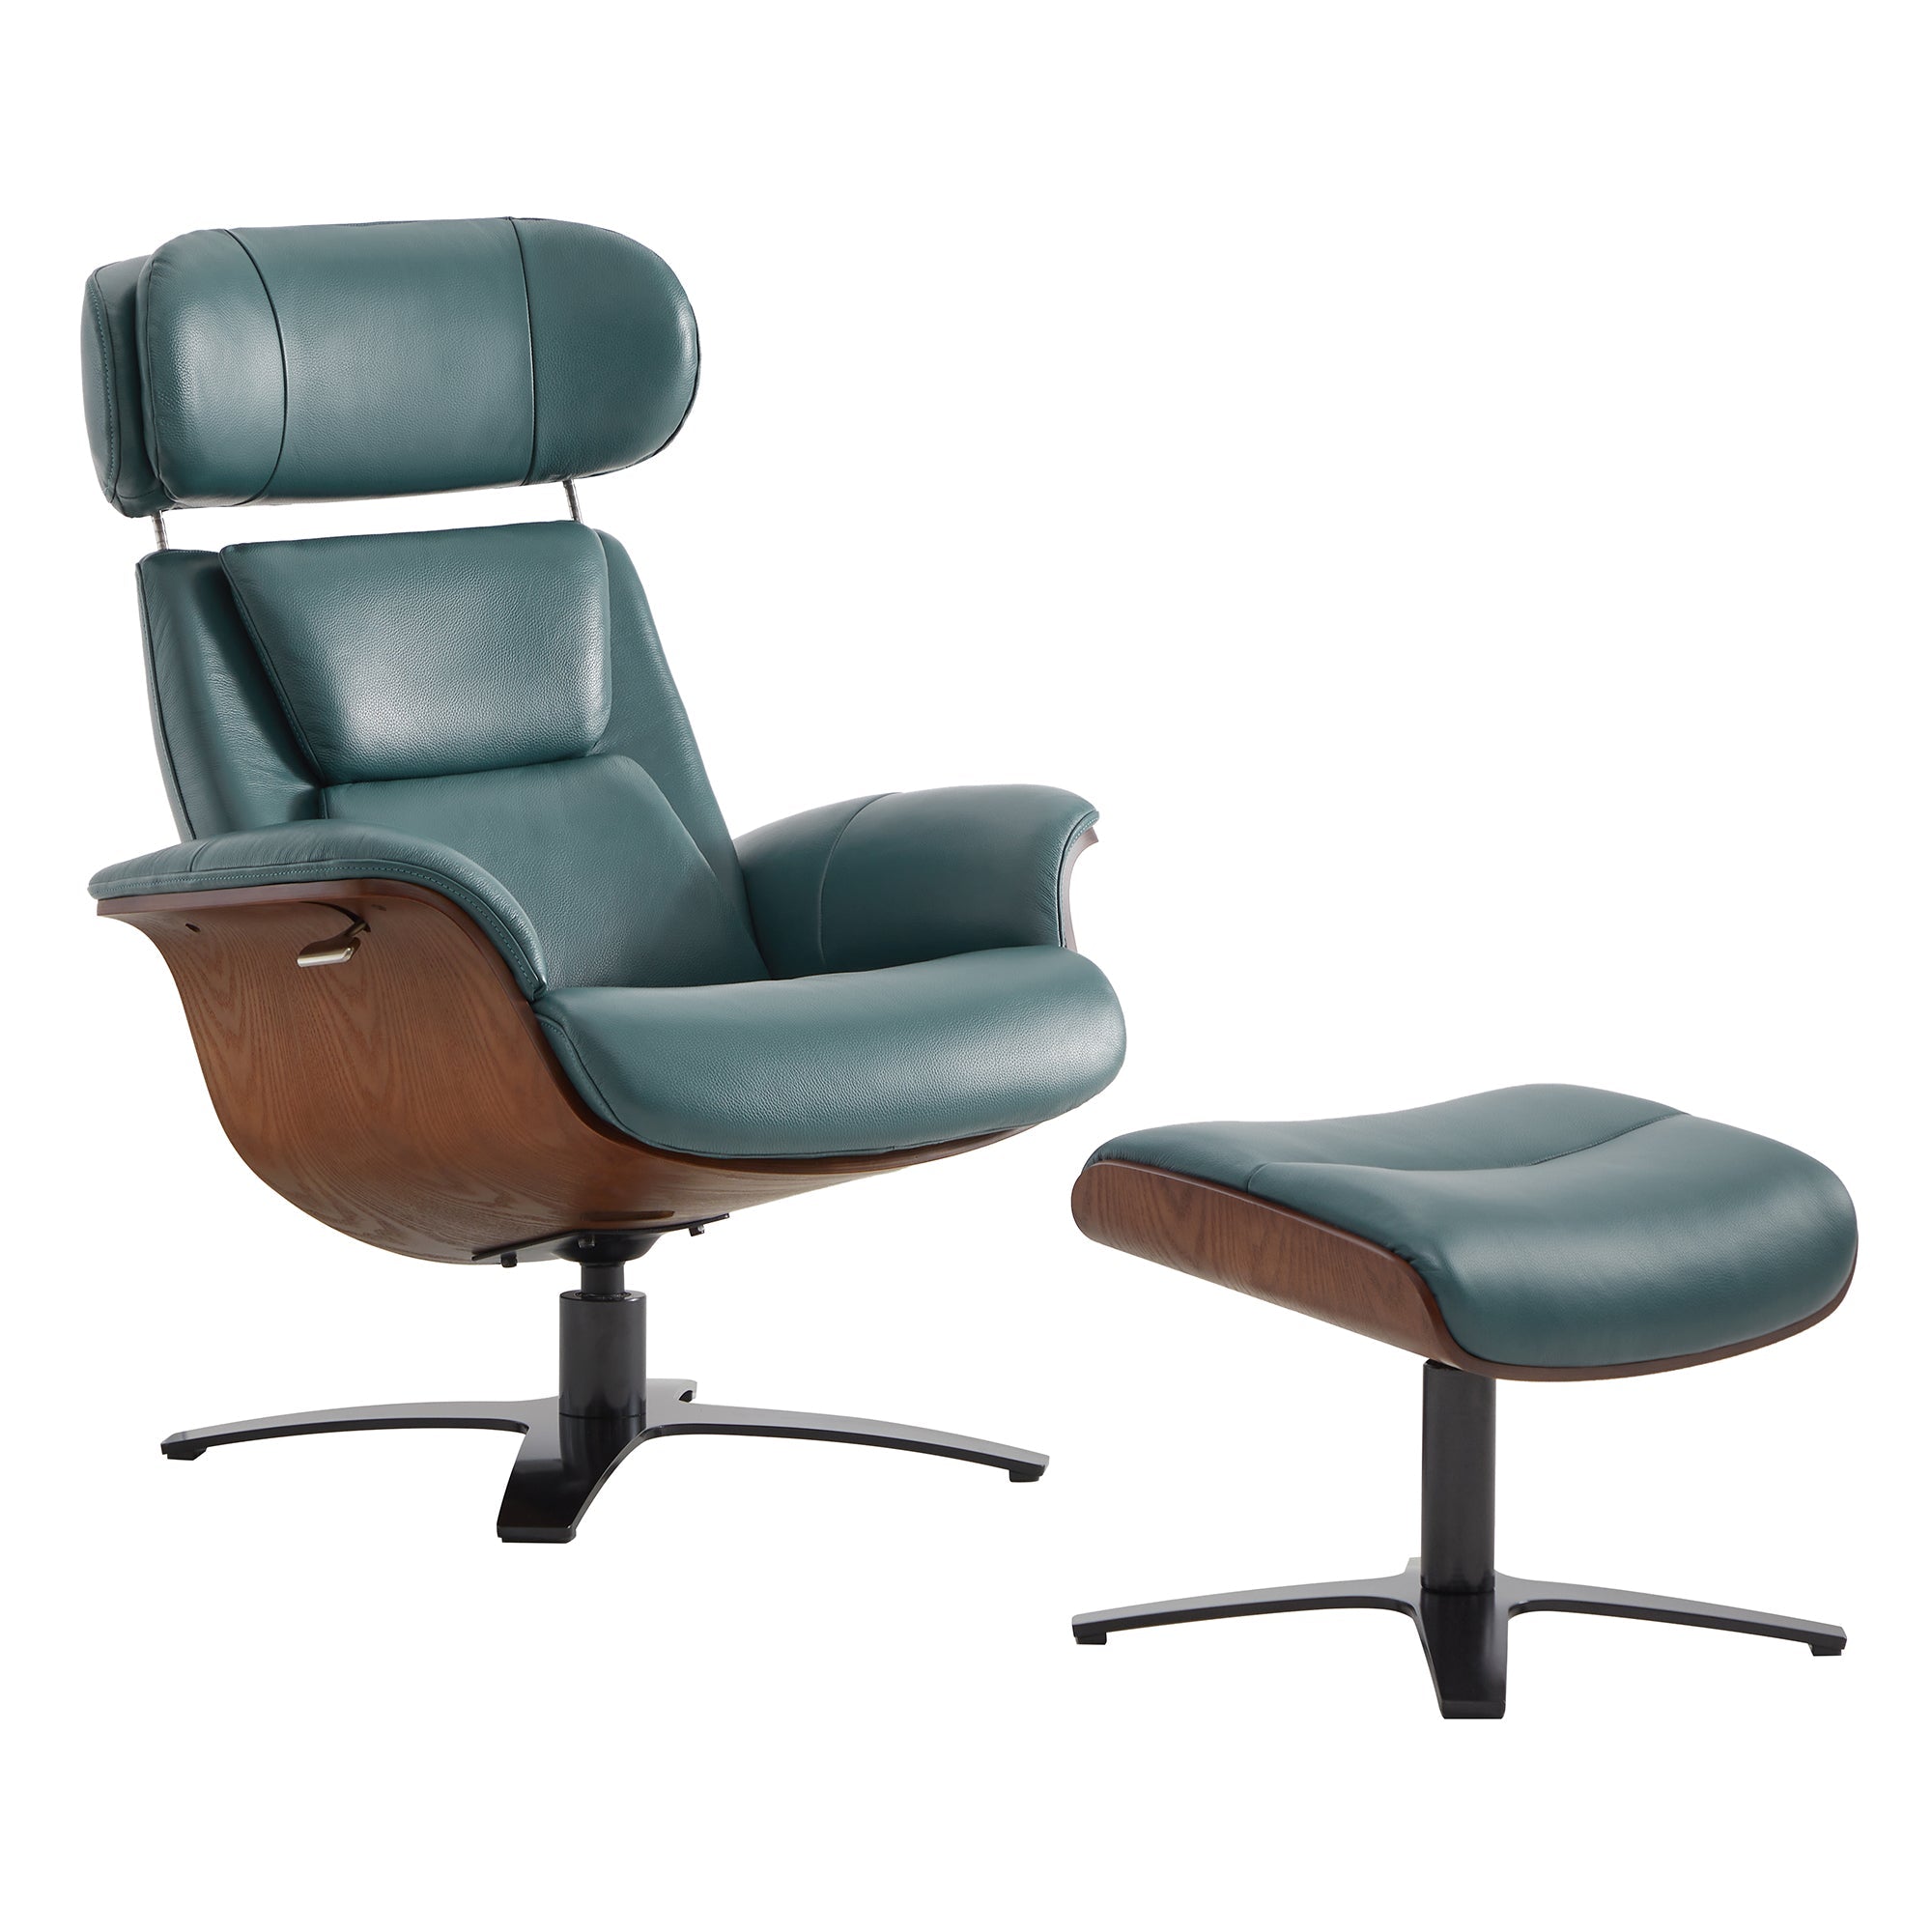 CHITA LIVING-Elvin Leather Recliner & Ottoman-Recliners-Genuine Top-grain Leather-Teal-